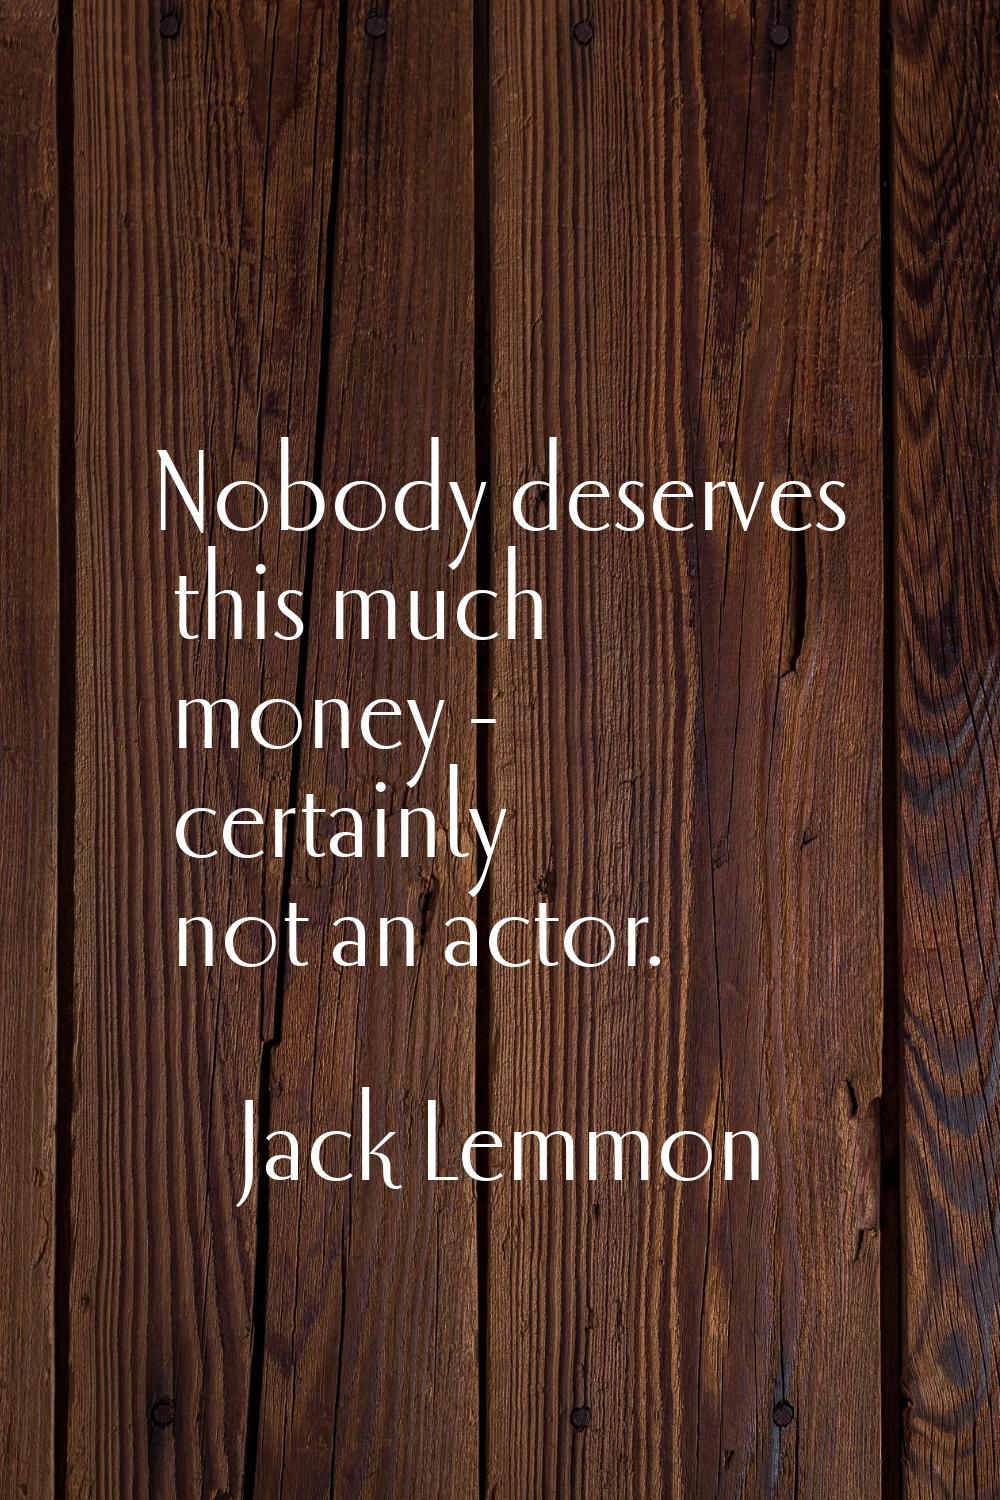 Nobody deserves this much money - certainly not an actor.